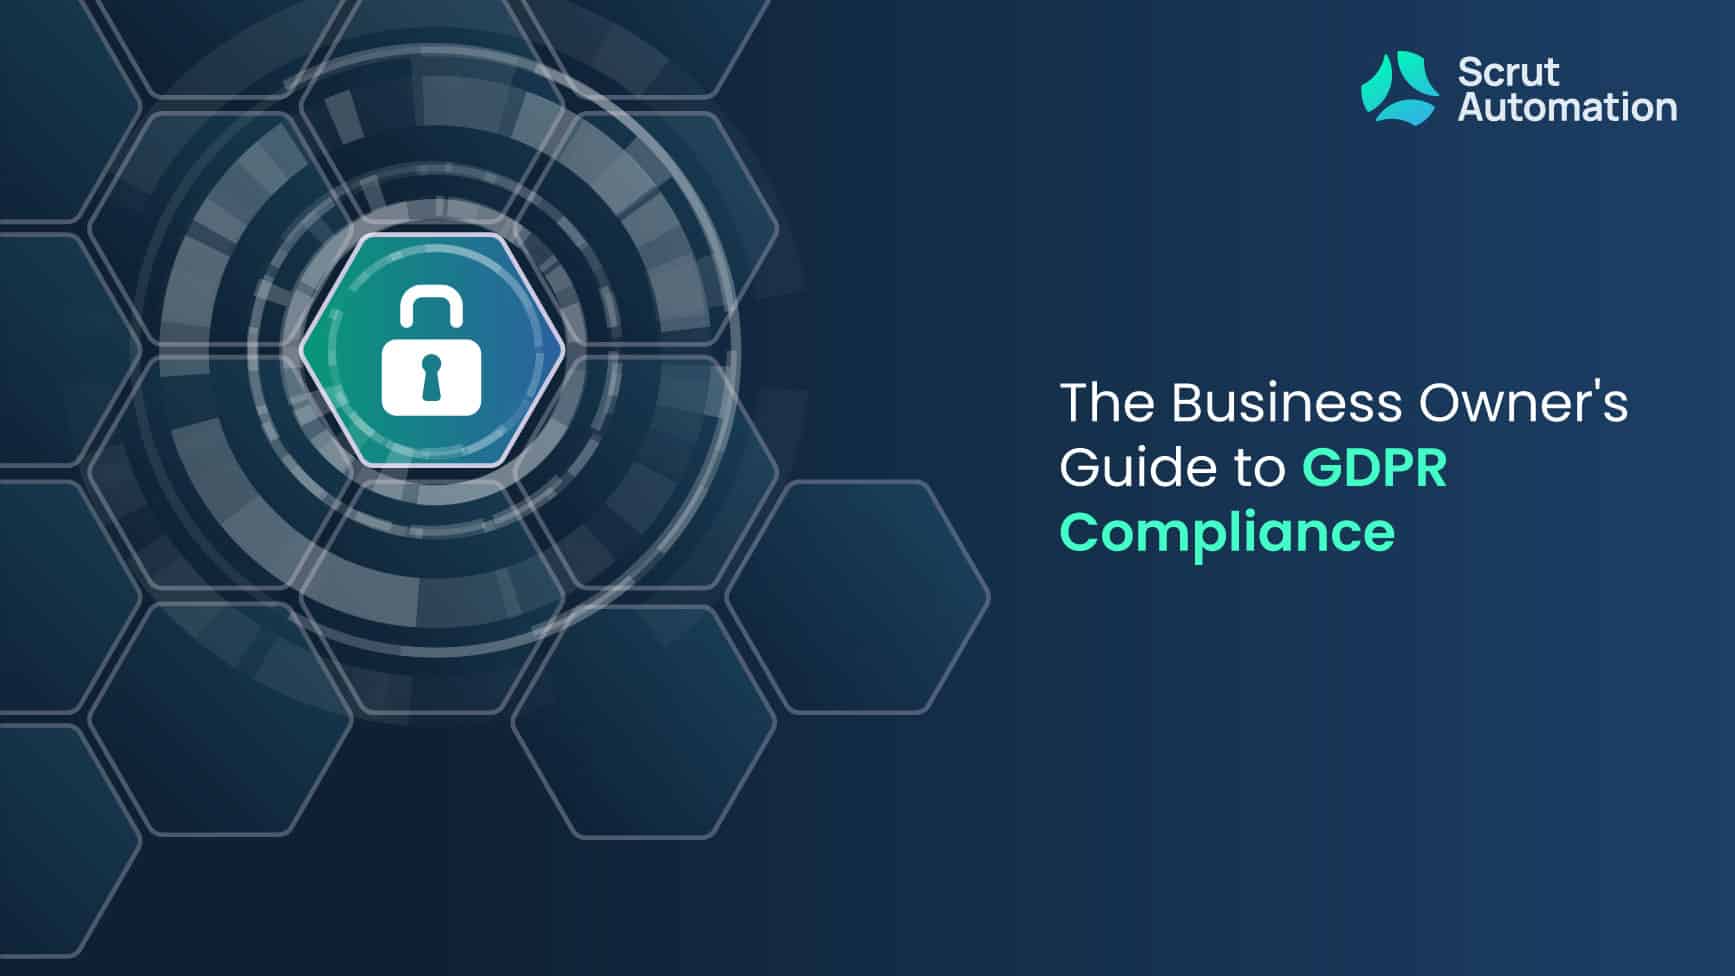 Complete guide for GDPR